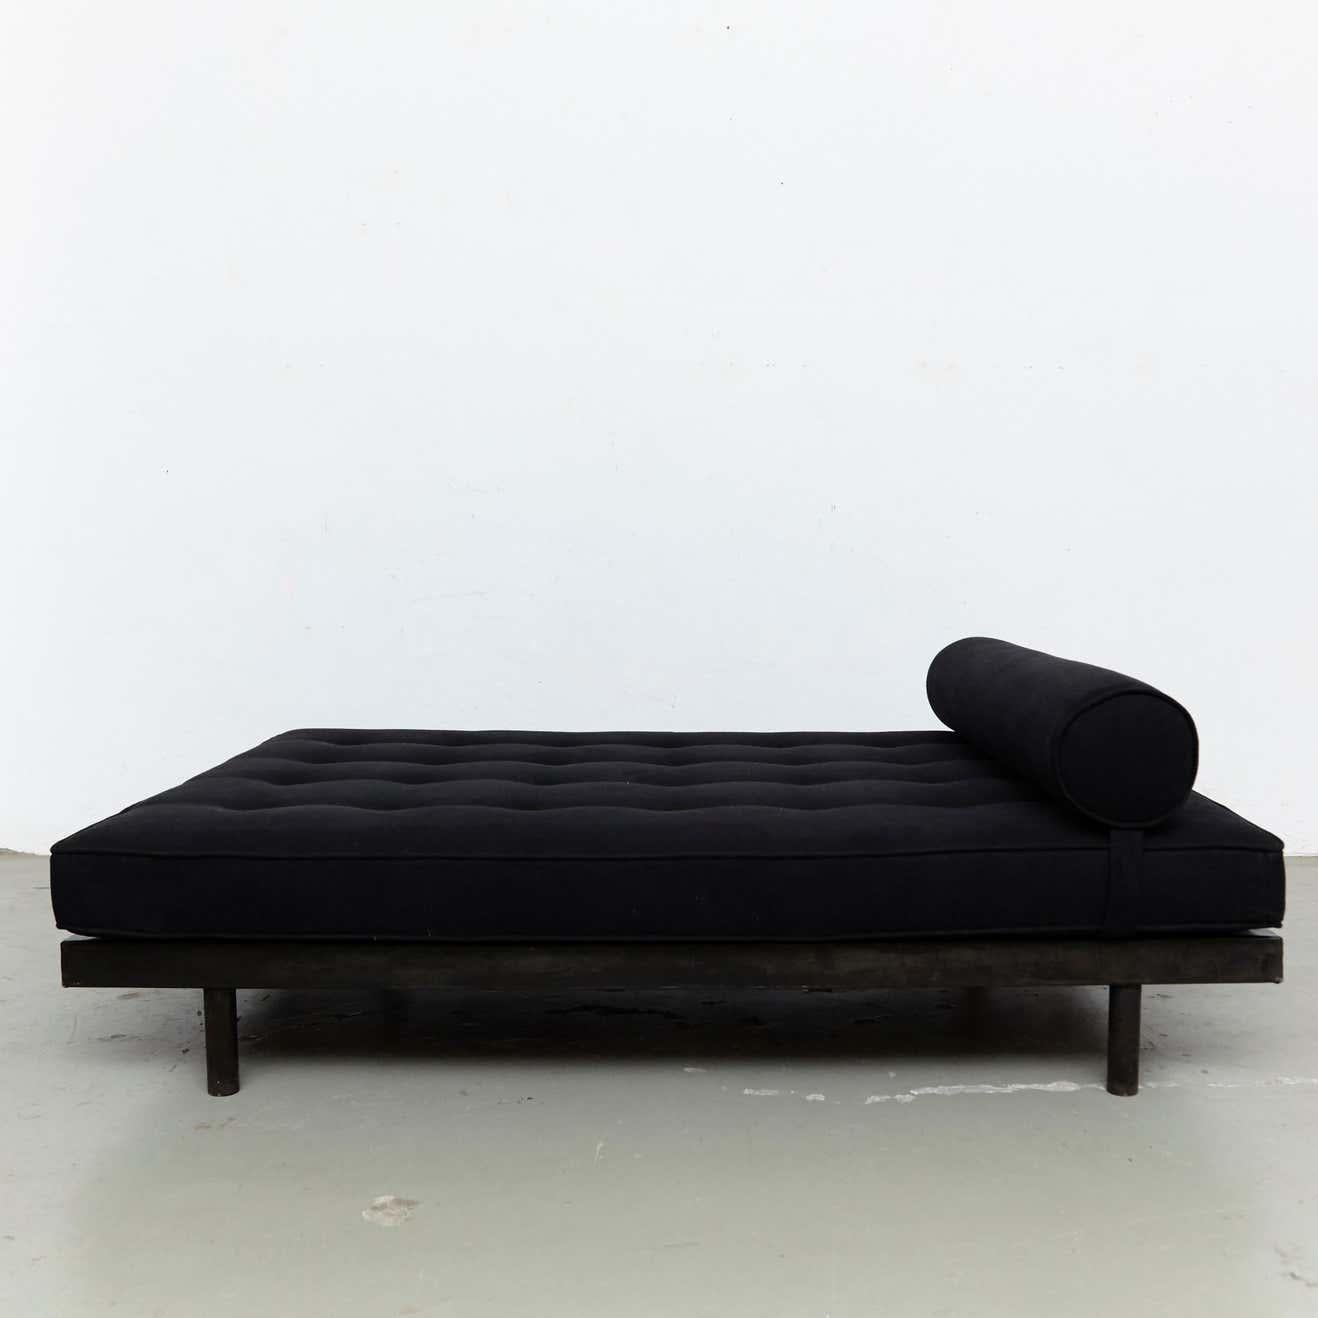 Jean Prouvé S.C.A.L. Double Daybed, circa 1950 For Sale 5